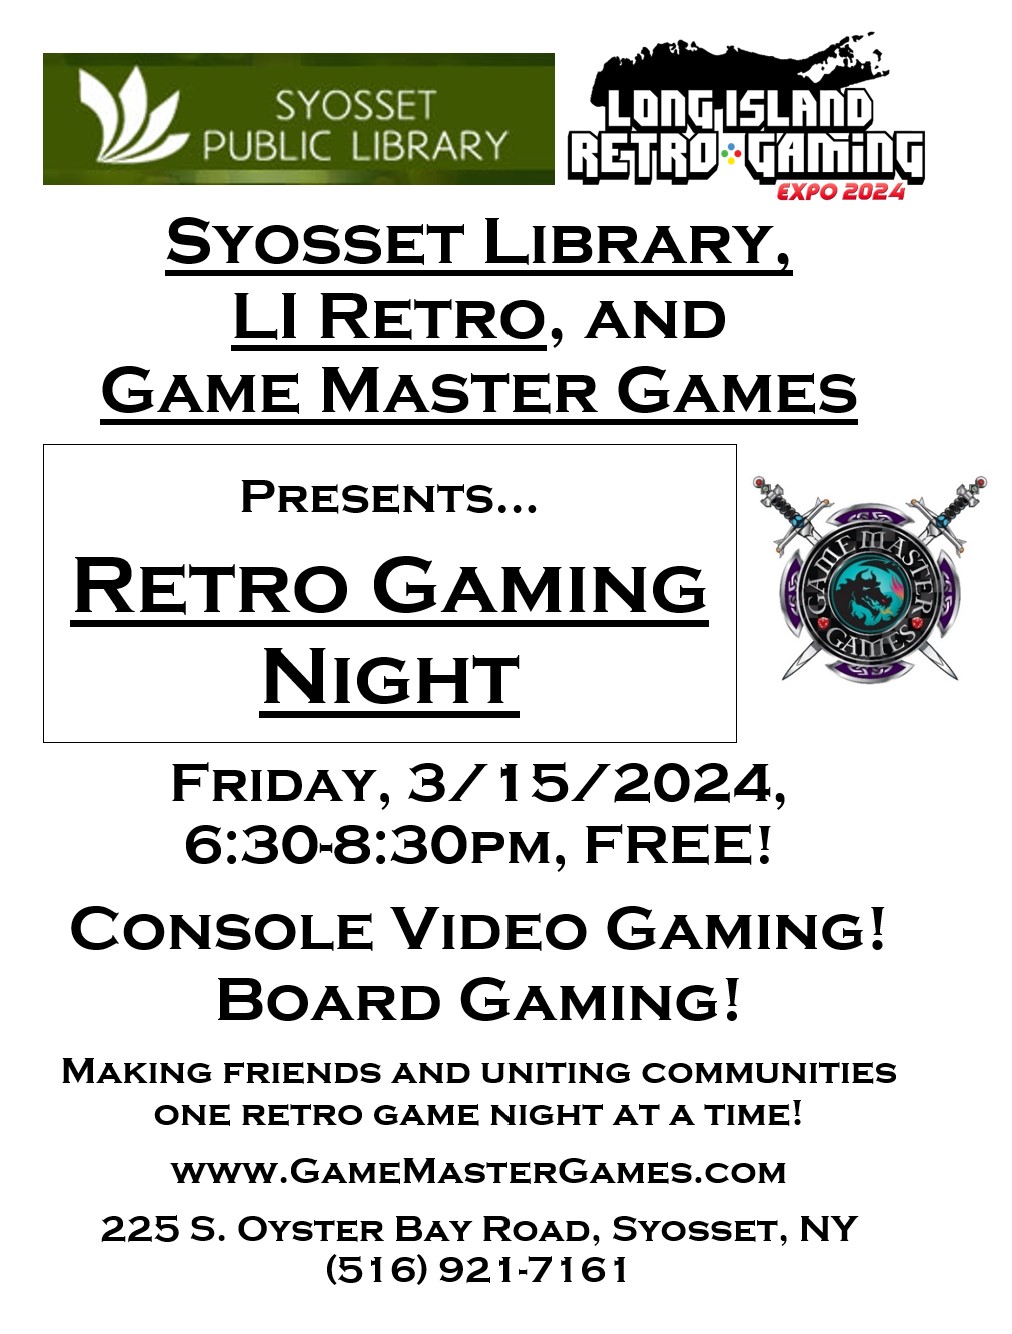 Have fun and make some new friends! Retro Game Night at the Syosset Library!